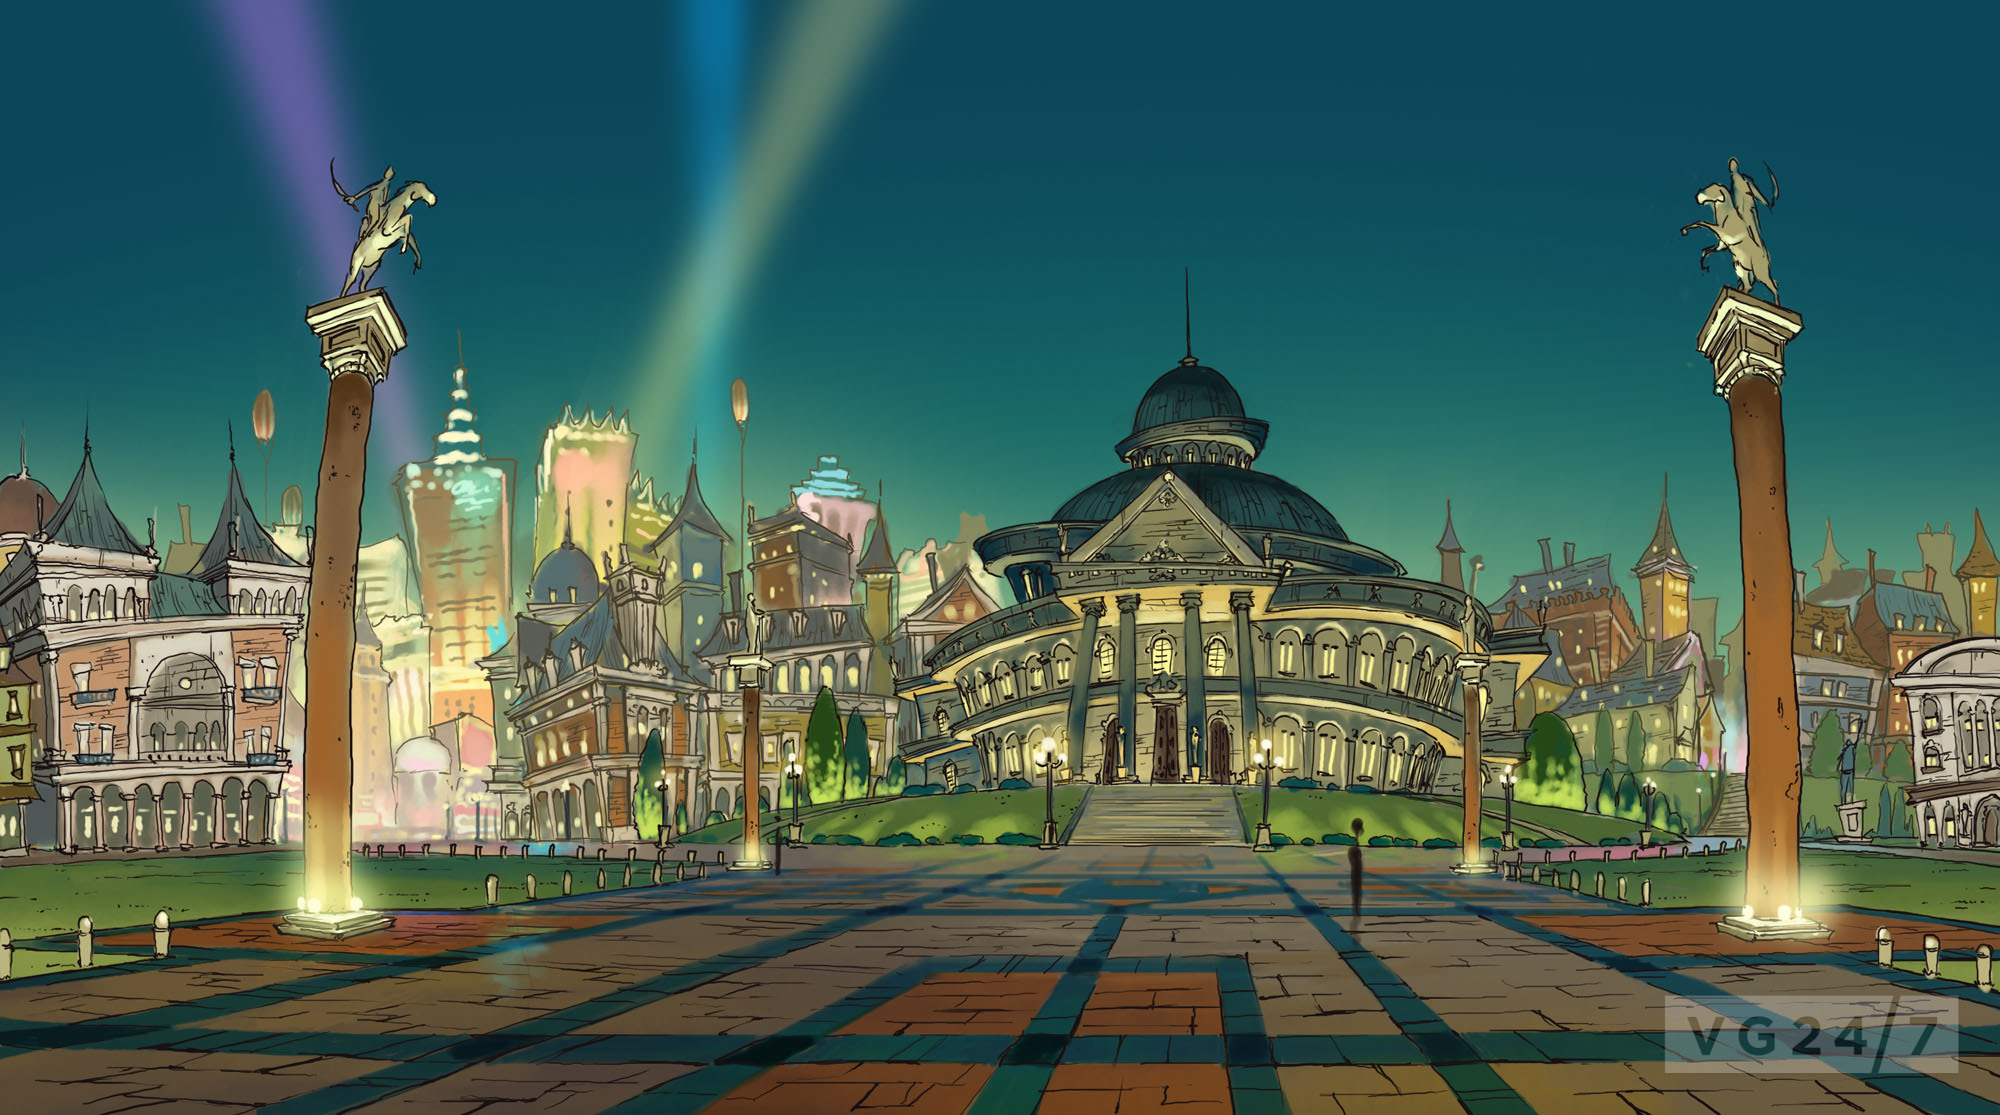 Screenshot image of the town plaza from "Professor Layton and the Miracle Mask," 2011 (Image from Level-5/Nintendo).